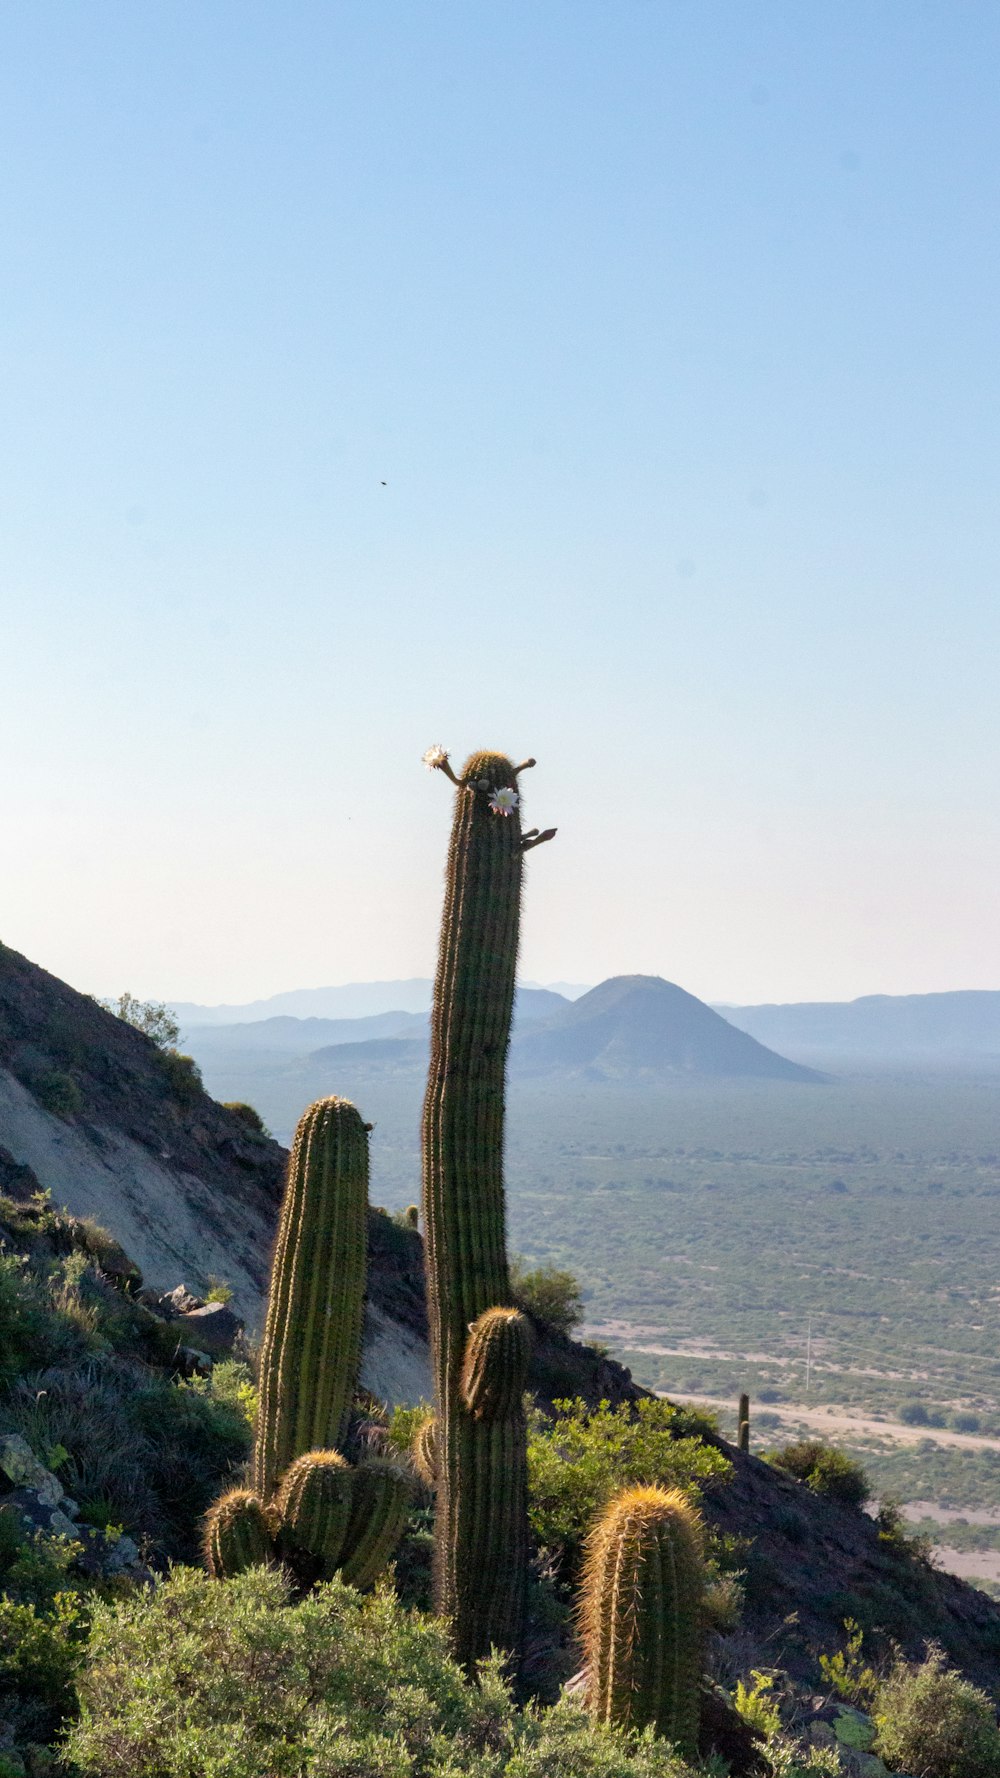 a cactus on a hill with mountains in the background